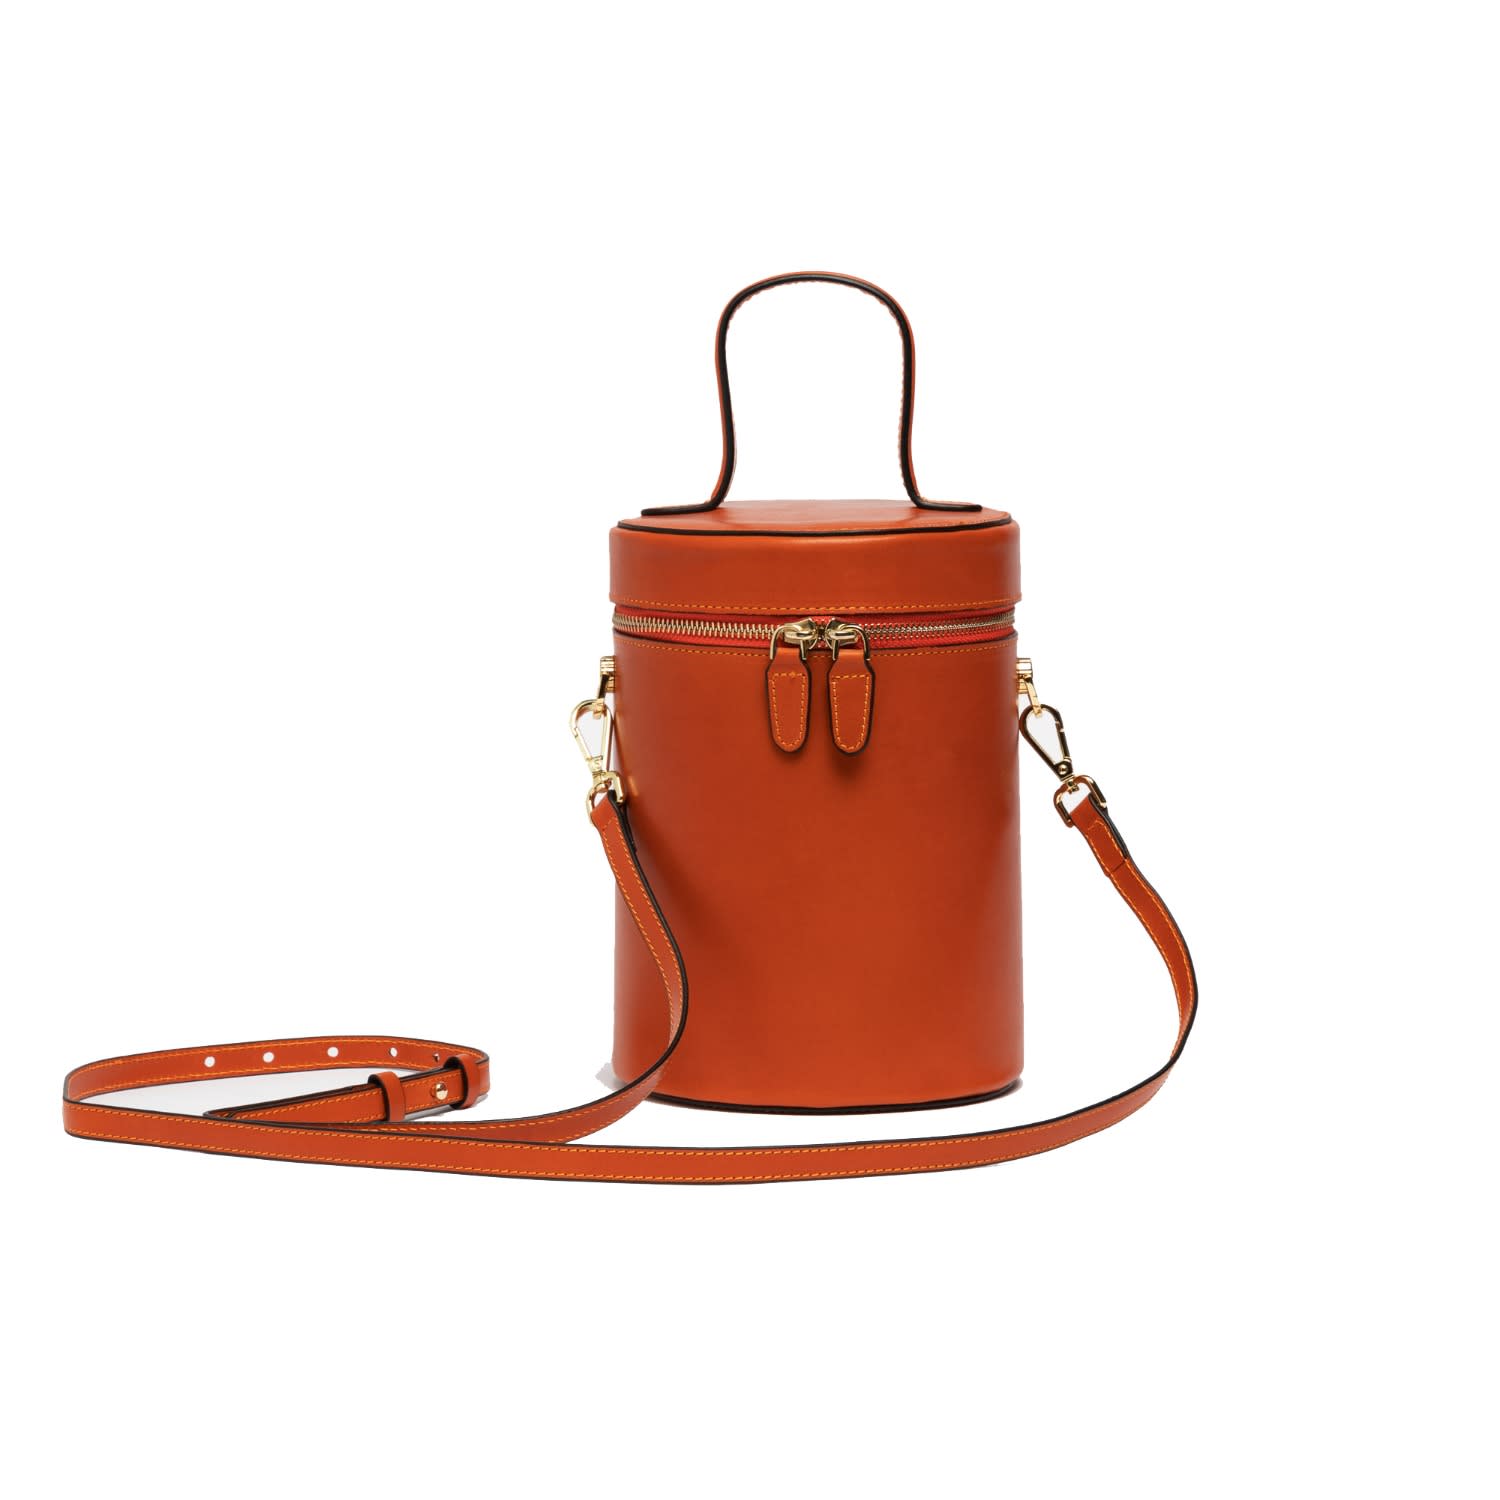 Full-Grain Leather Bucket with Cowhide Stripe - Camel